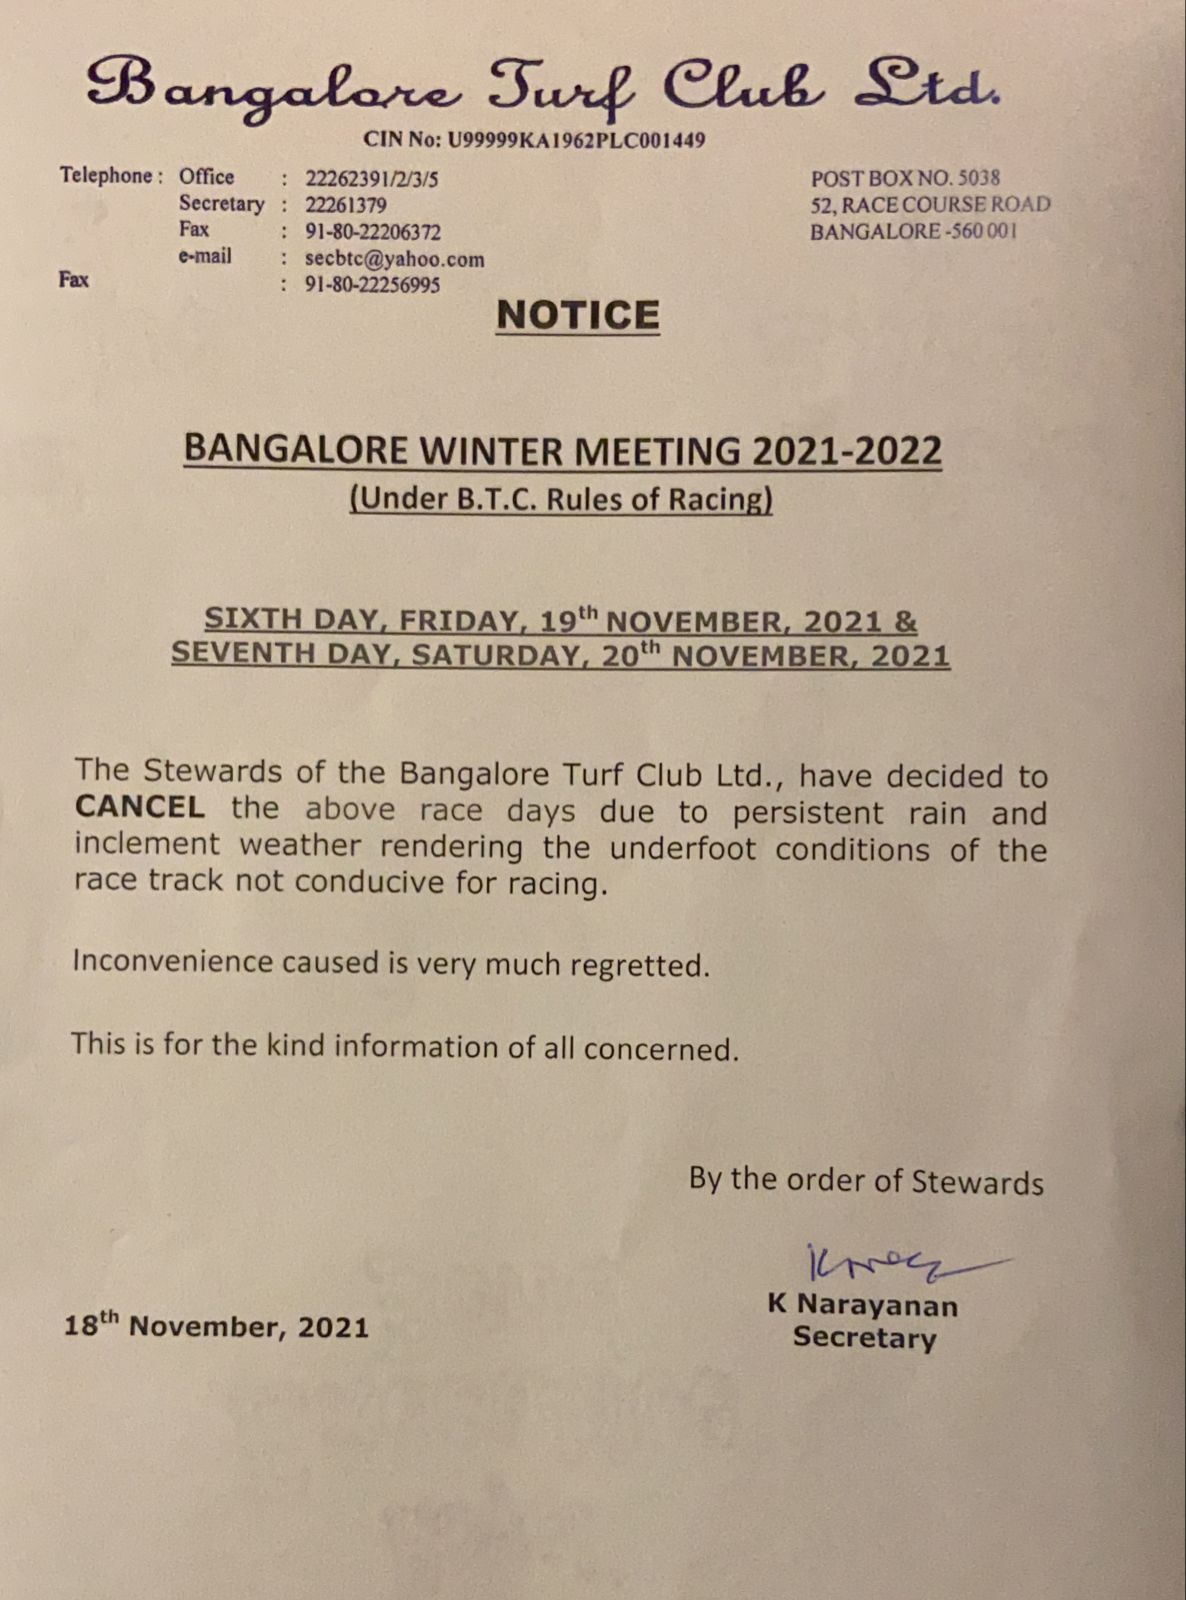 BANGALORE RACING CANCELLED AGAIN